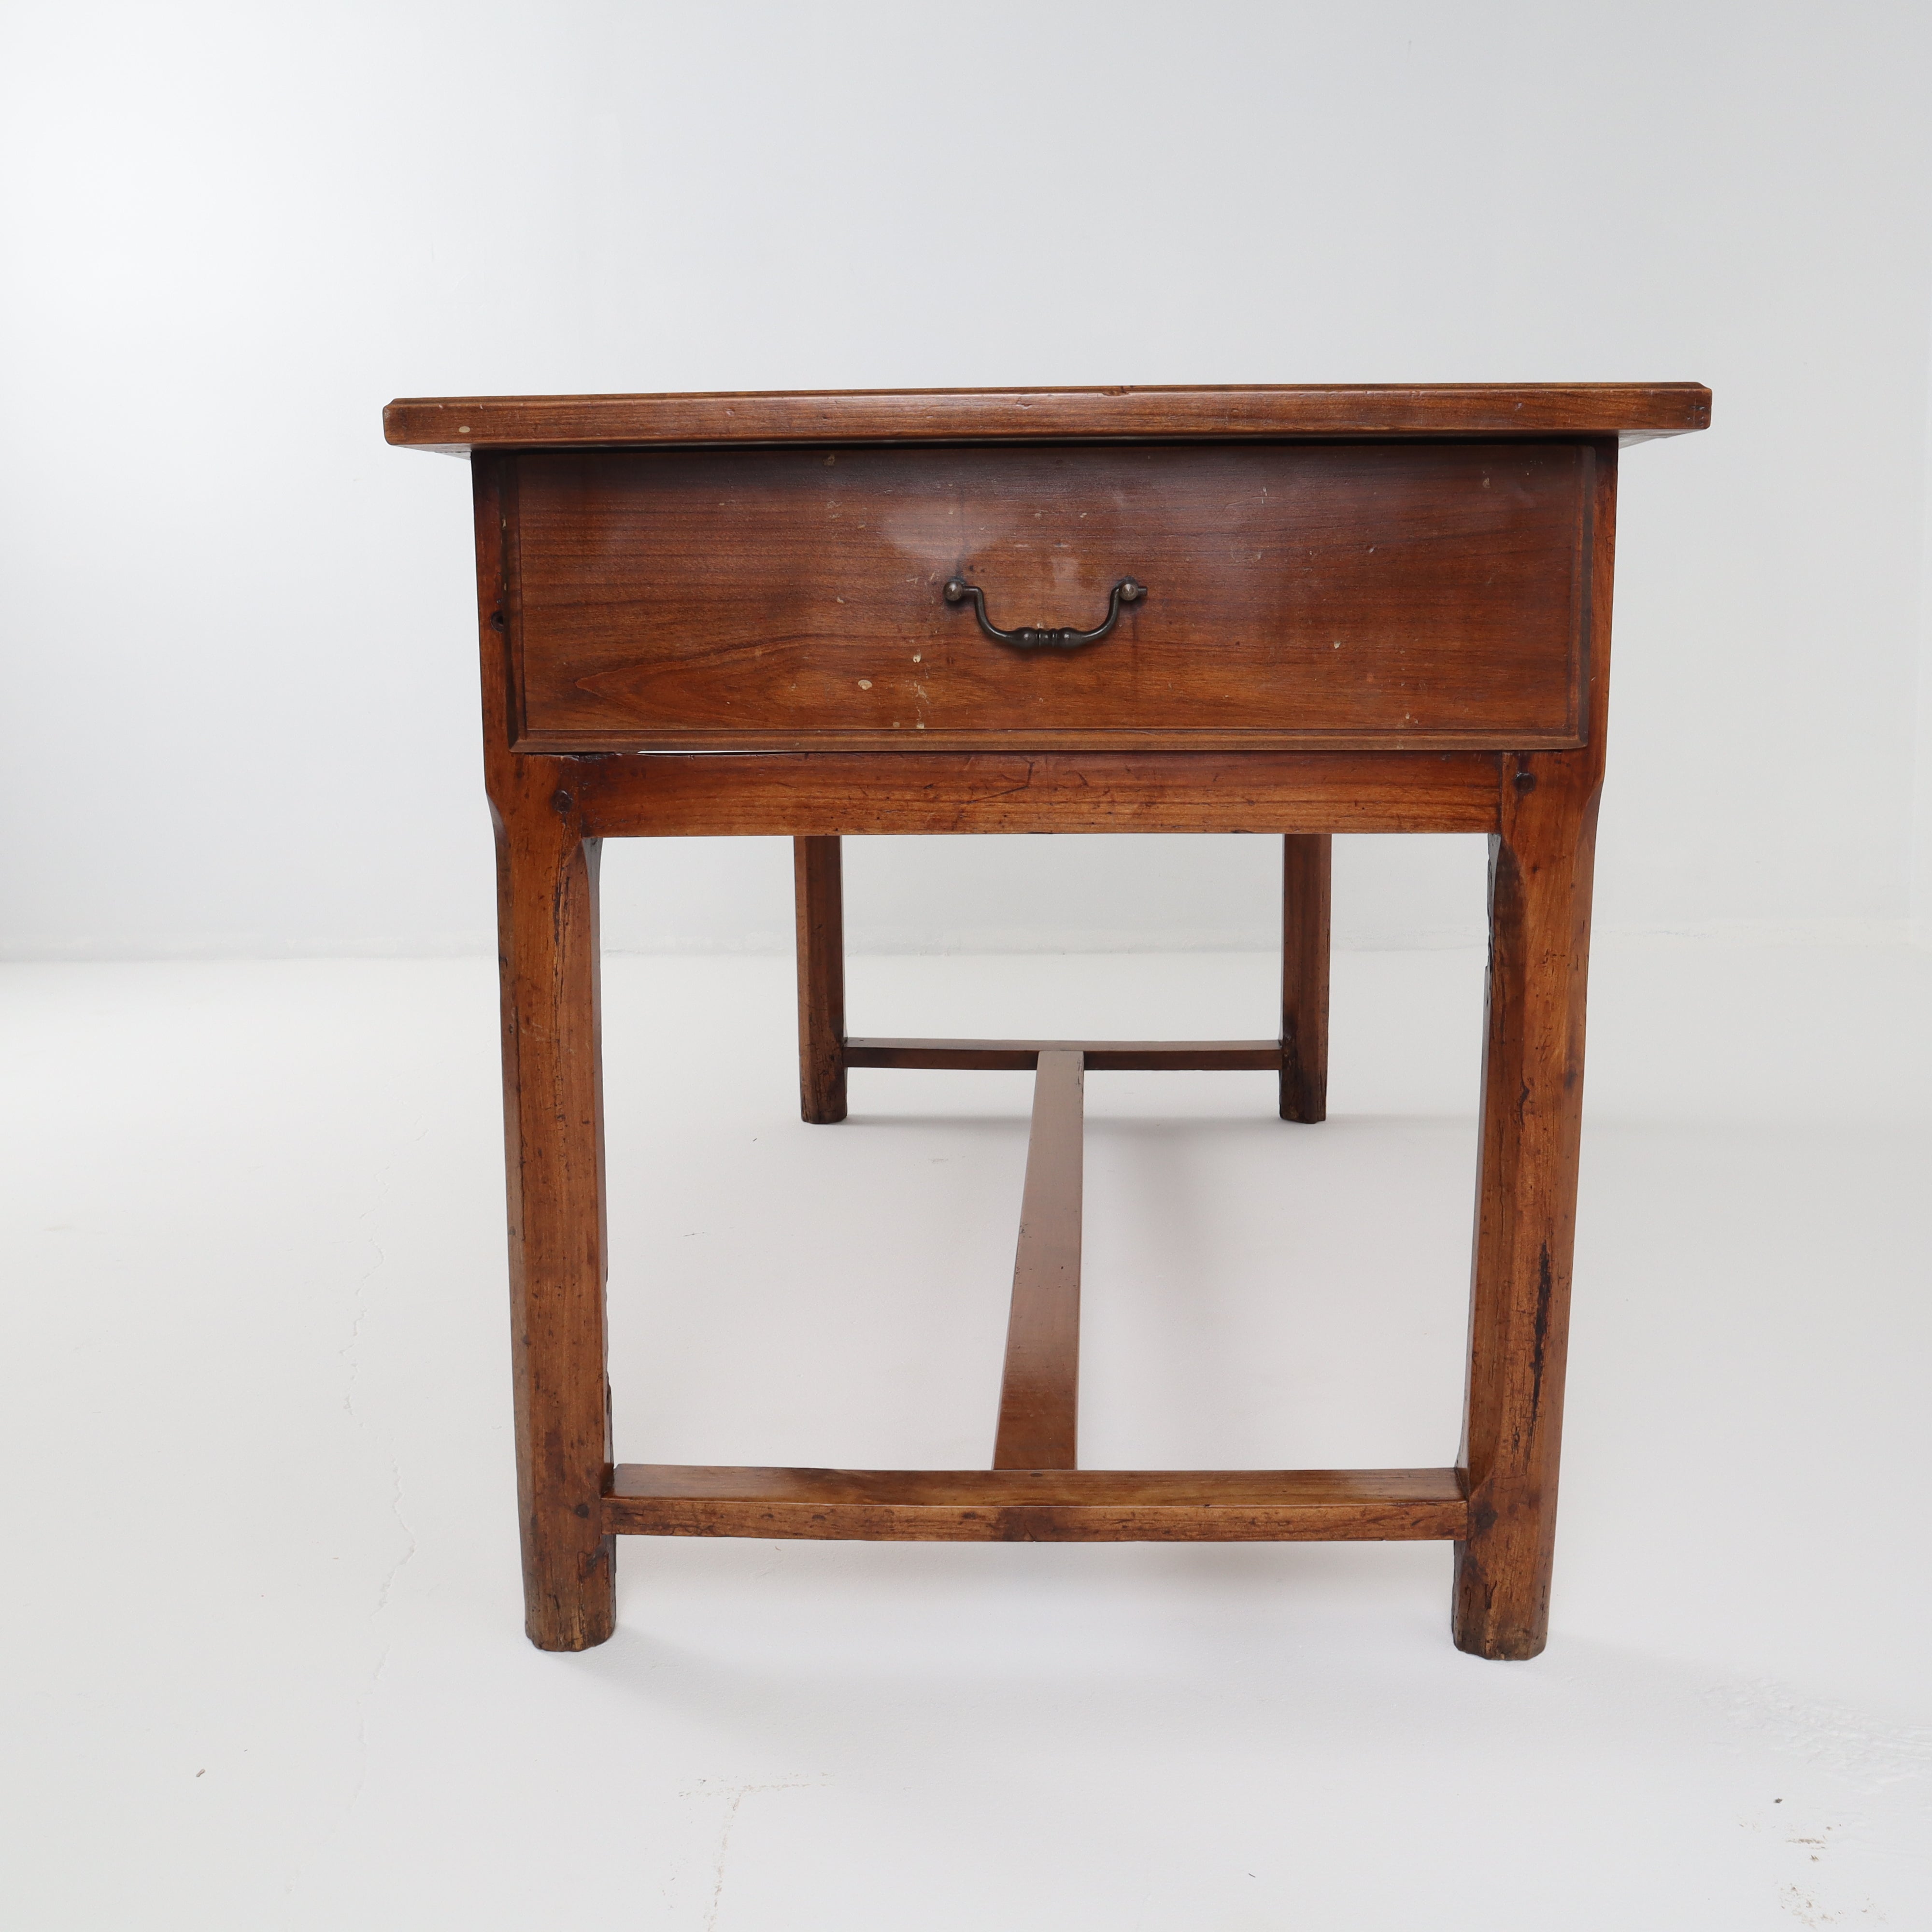 Antique French Farm Table c1860